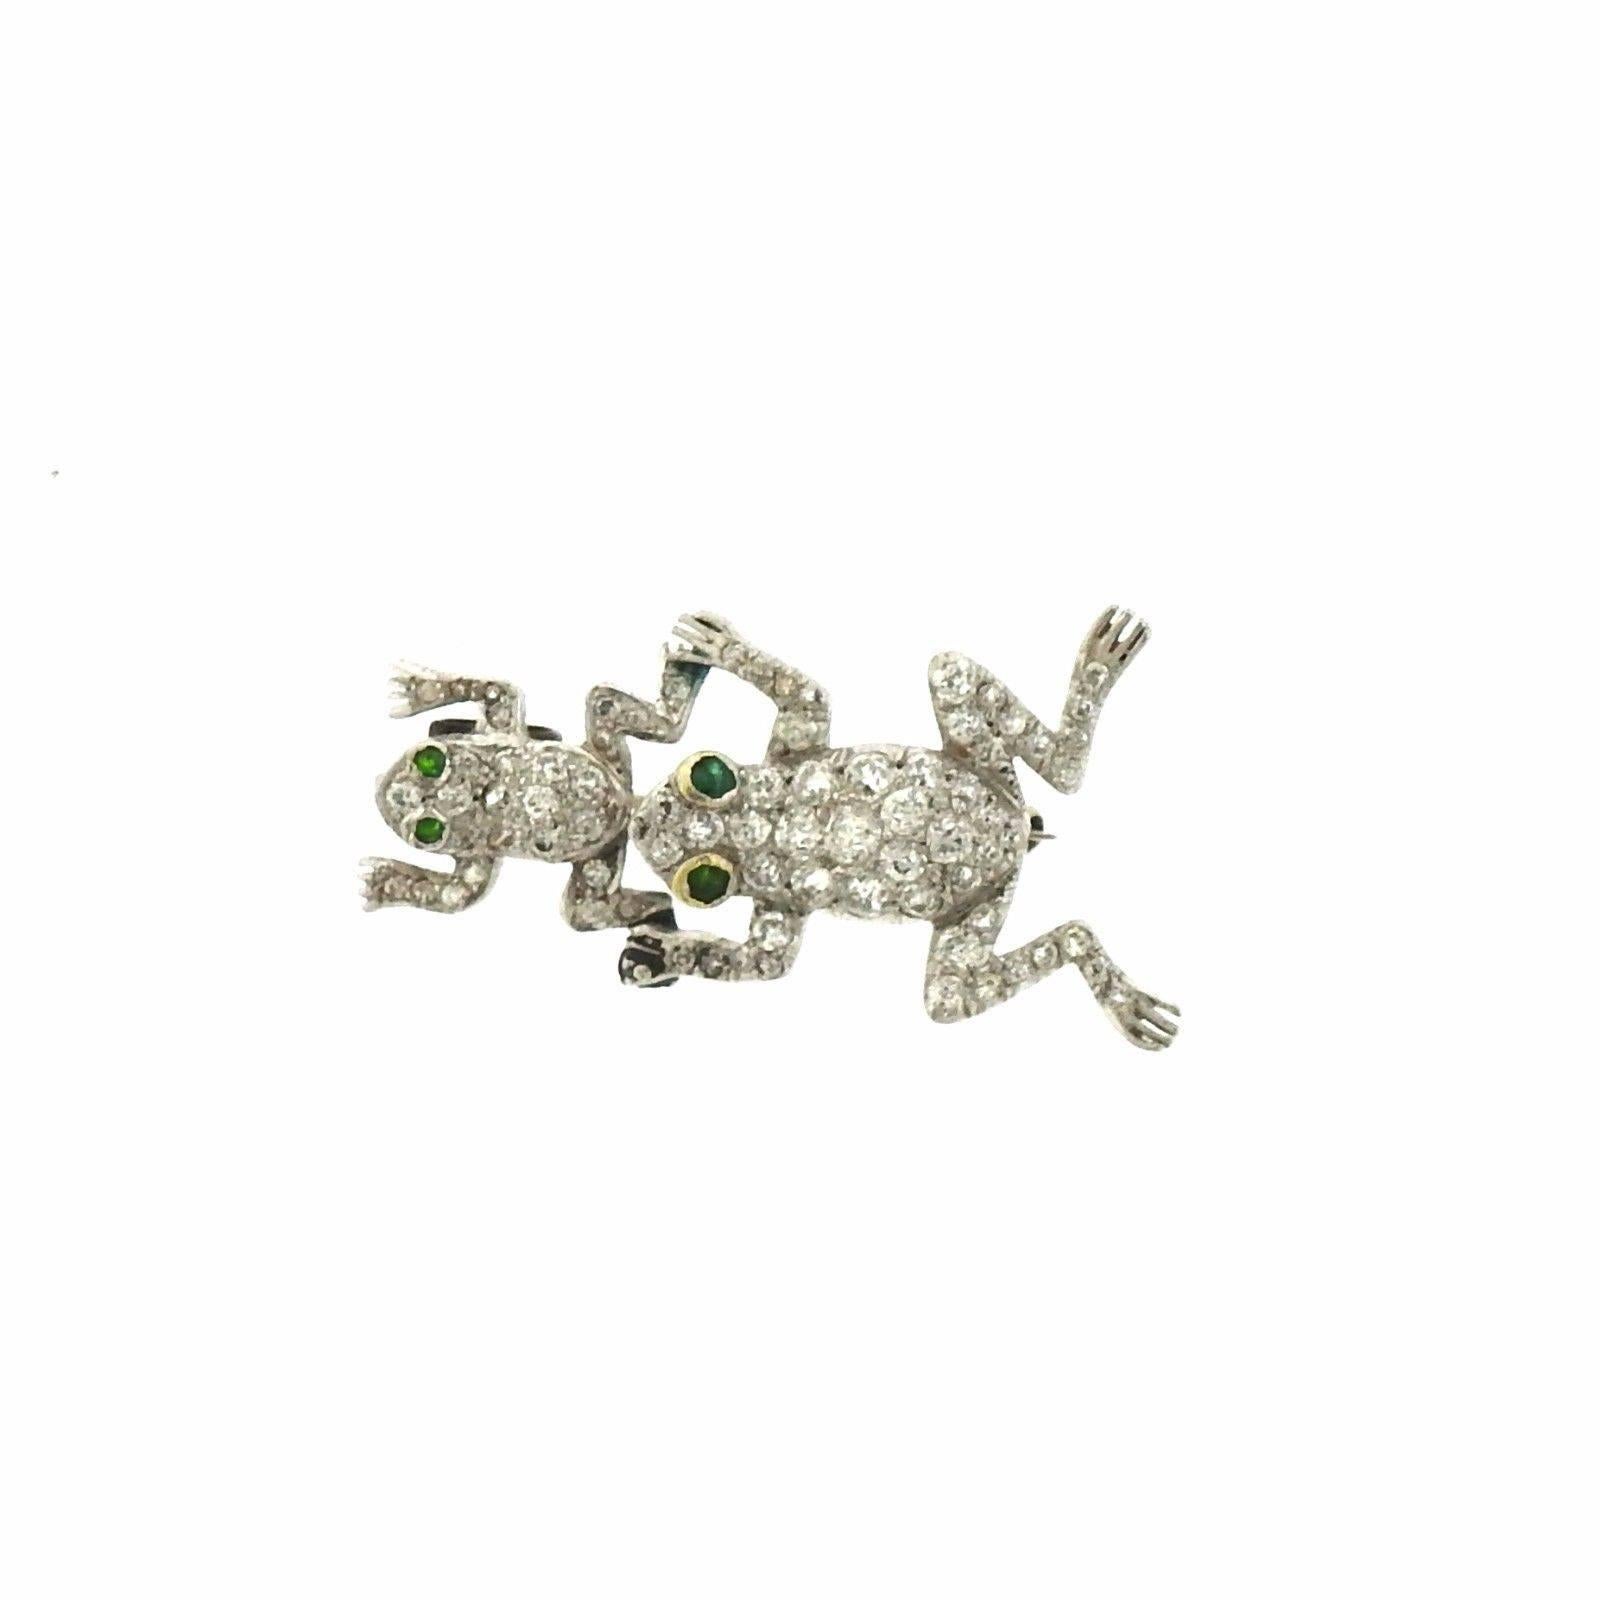 Antique Art Deco platinum frog brooch, crafted by Shreve & Co, set with emerald eyes and old mine cut diamonds. Brooch measures 39mm x 21mm. Marked: Shreve & Co.  (Tested Platinum). Weight of the brooch - 7.2 grams